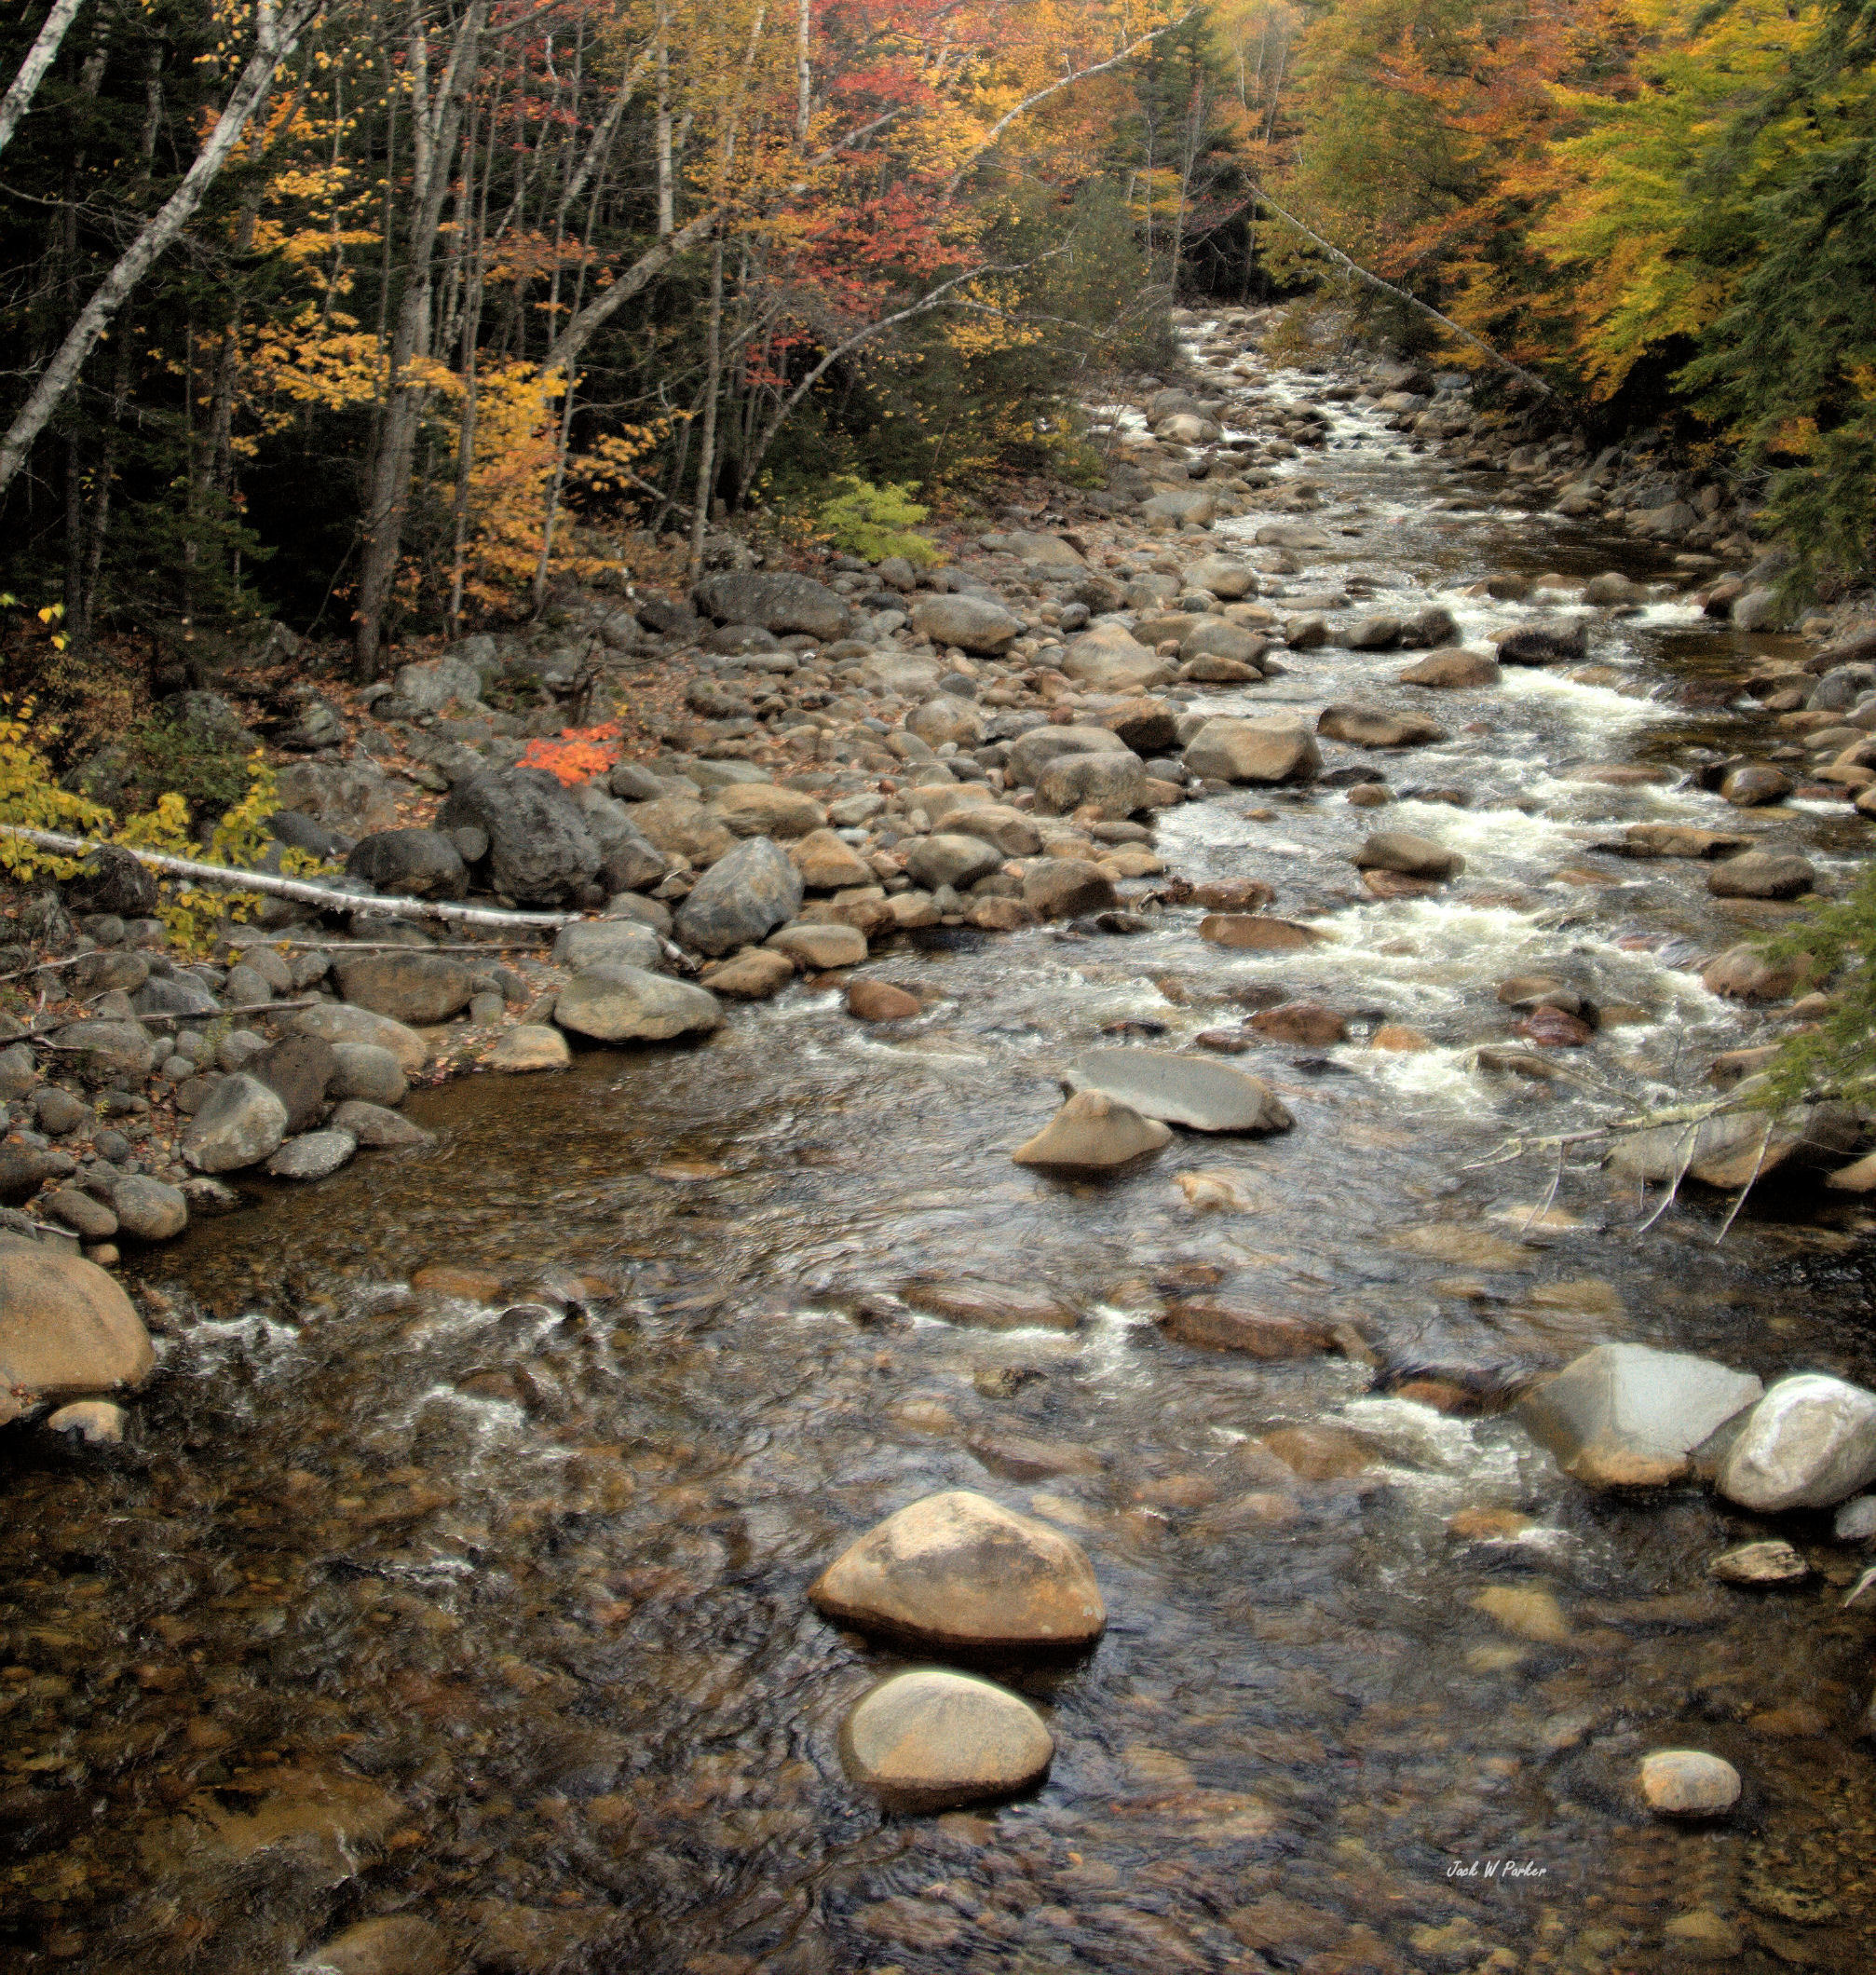 Autumn Stream (user submitted)